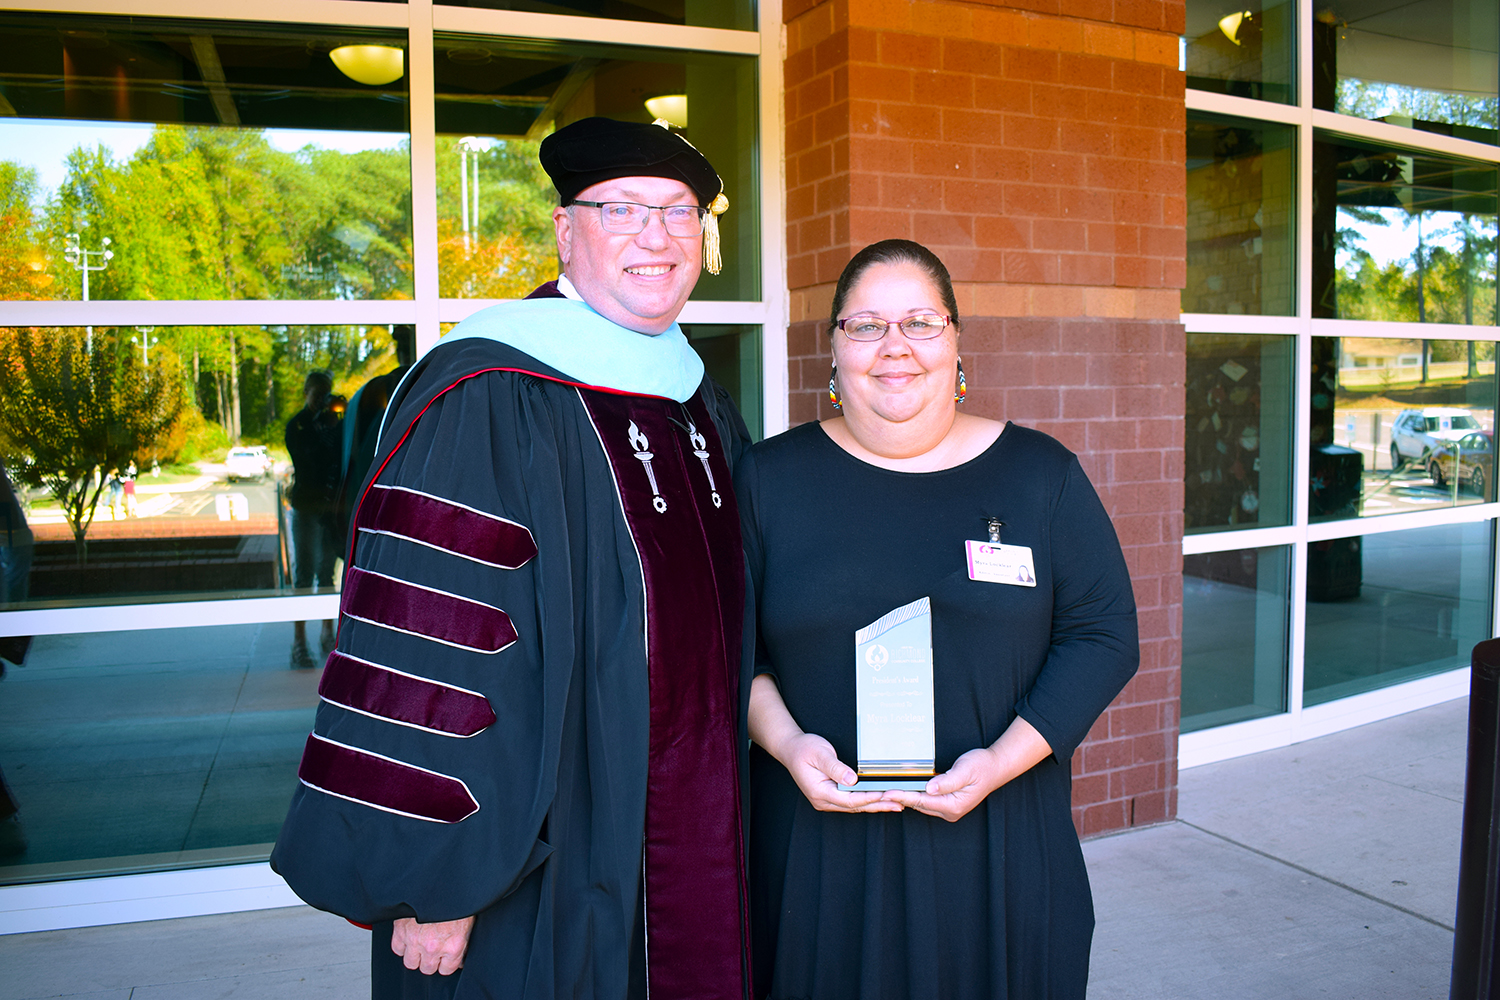 Dr. Dale McInnis stands with Myra Locklear, who is holding her President's Award.